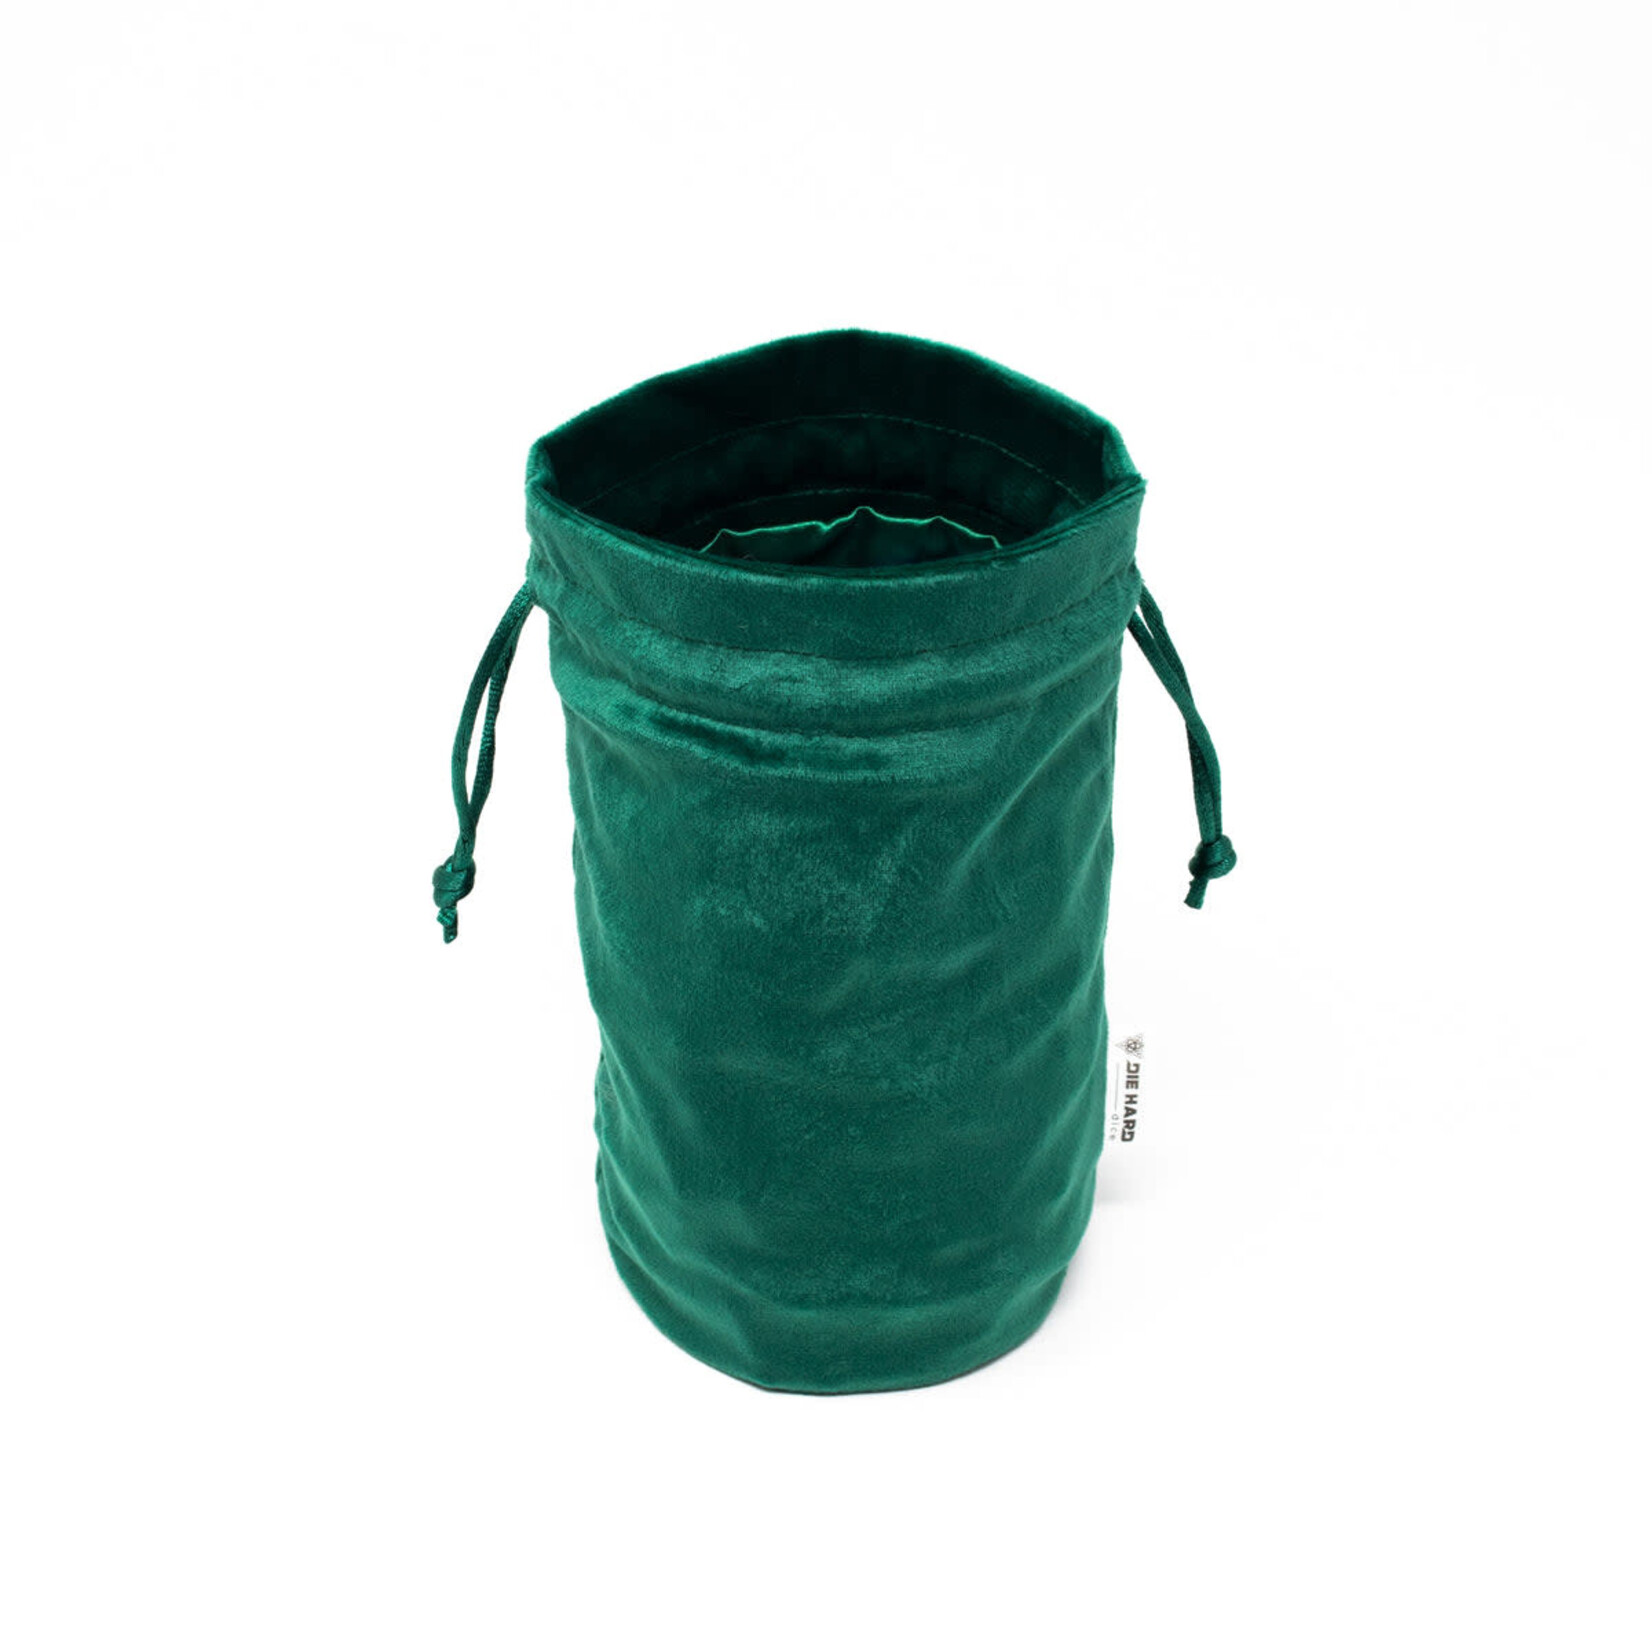 Die Hard Dice Level 1 Bag of Holding Green